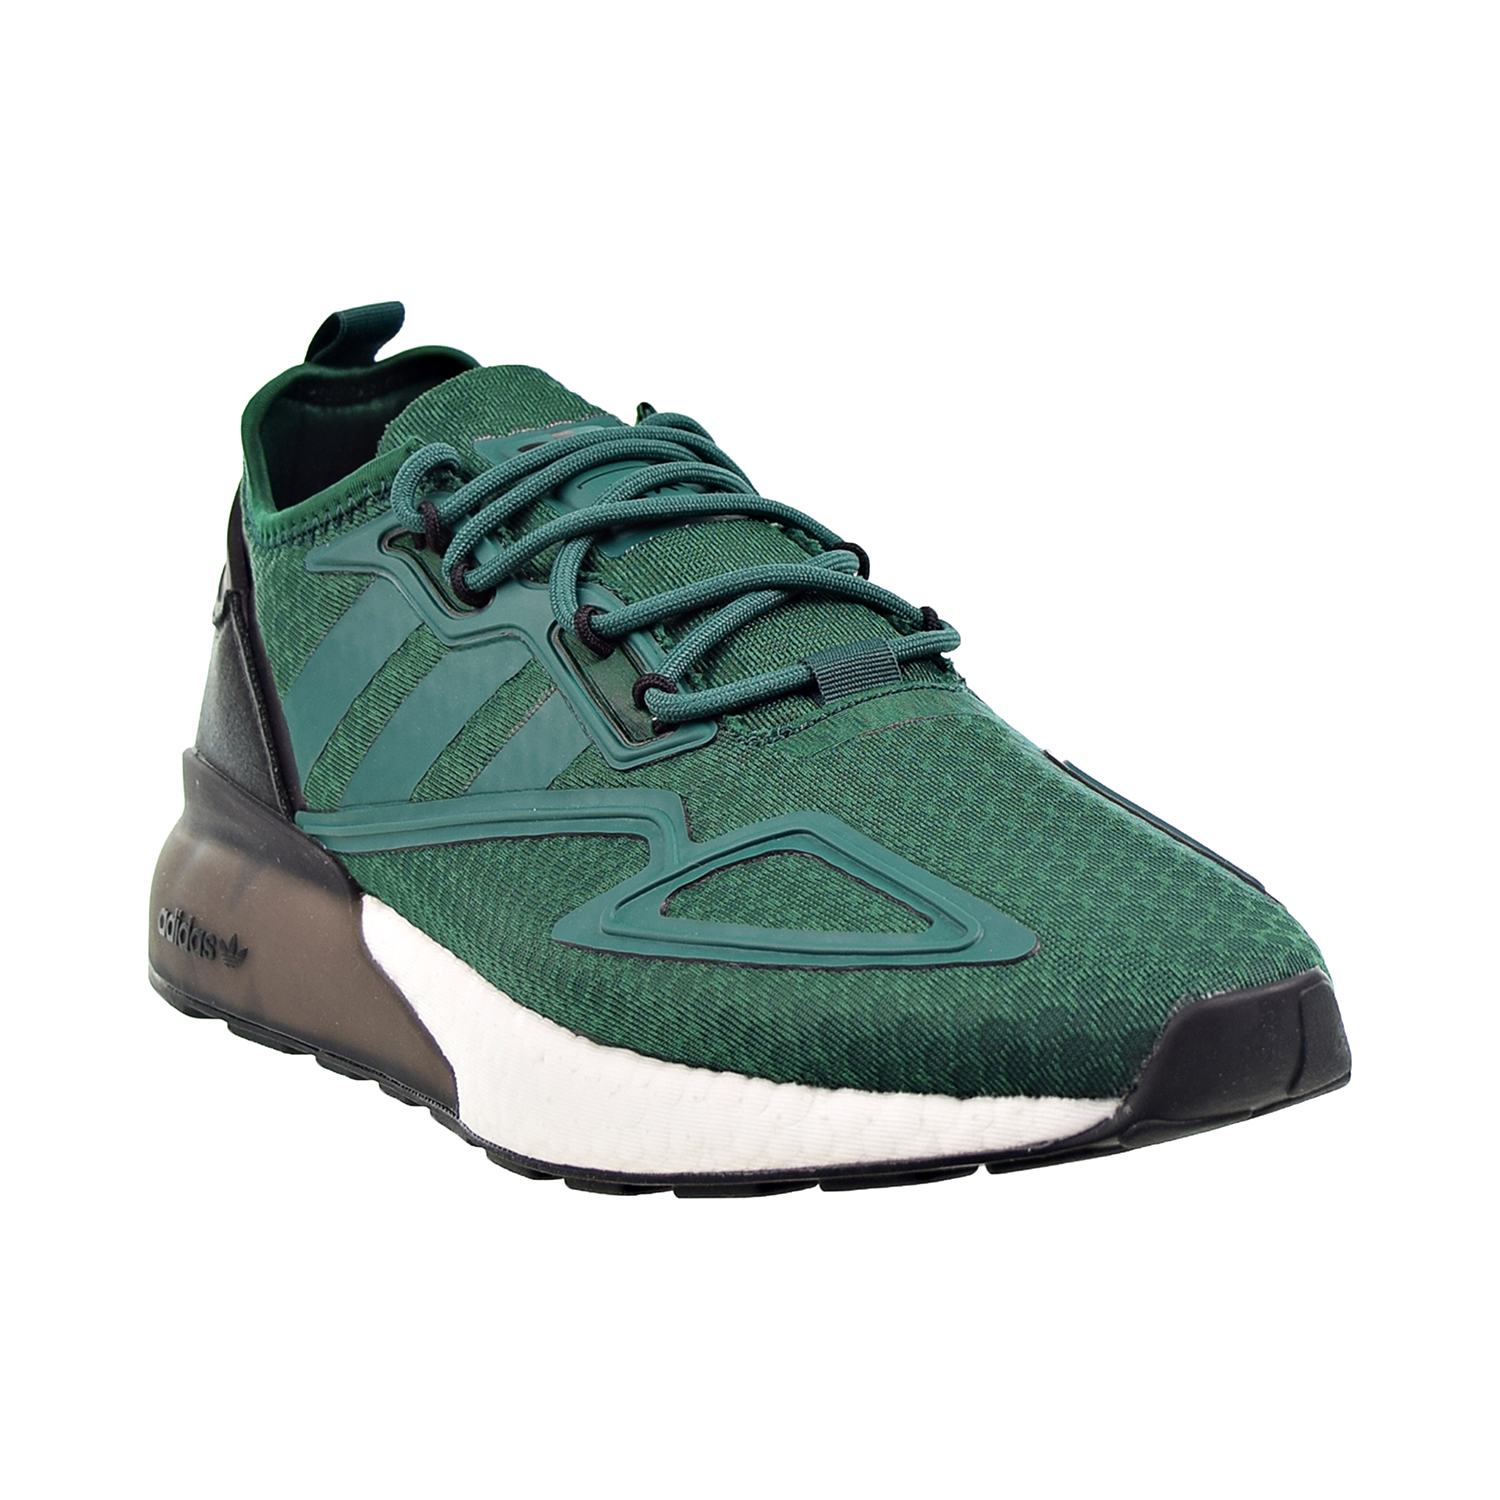 Adidas ZX 2K Boost Men's Shoes Collegiate Green-Cloud White gy5808